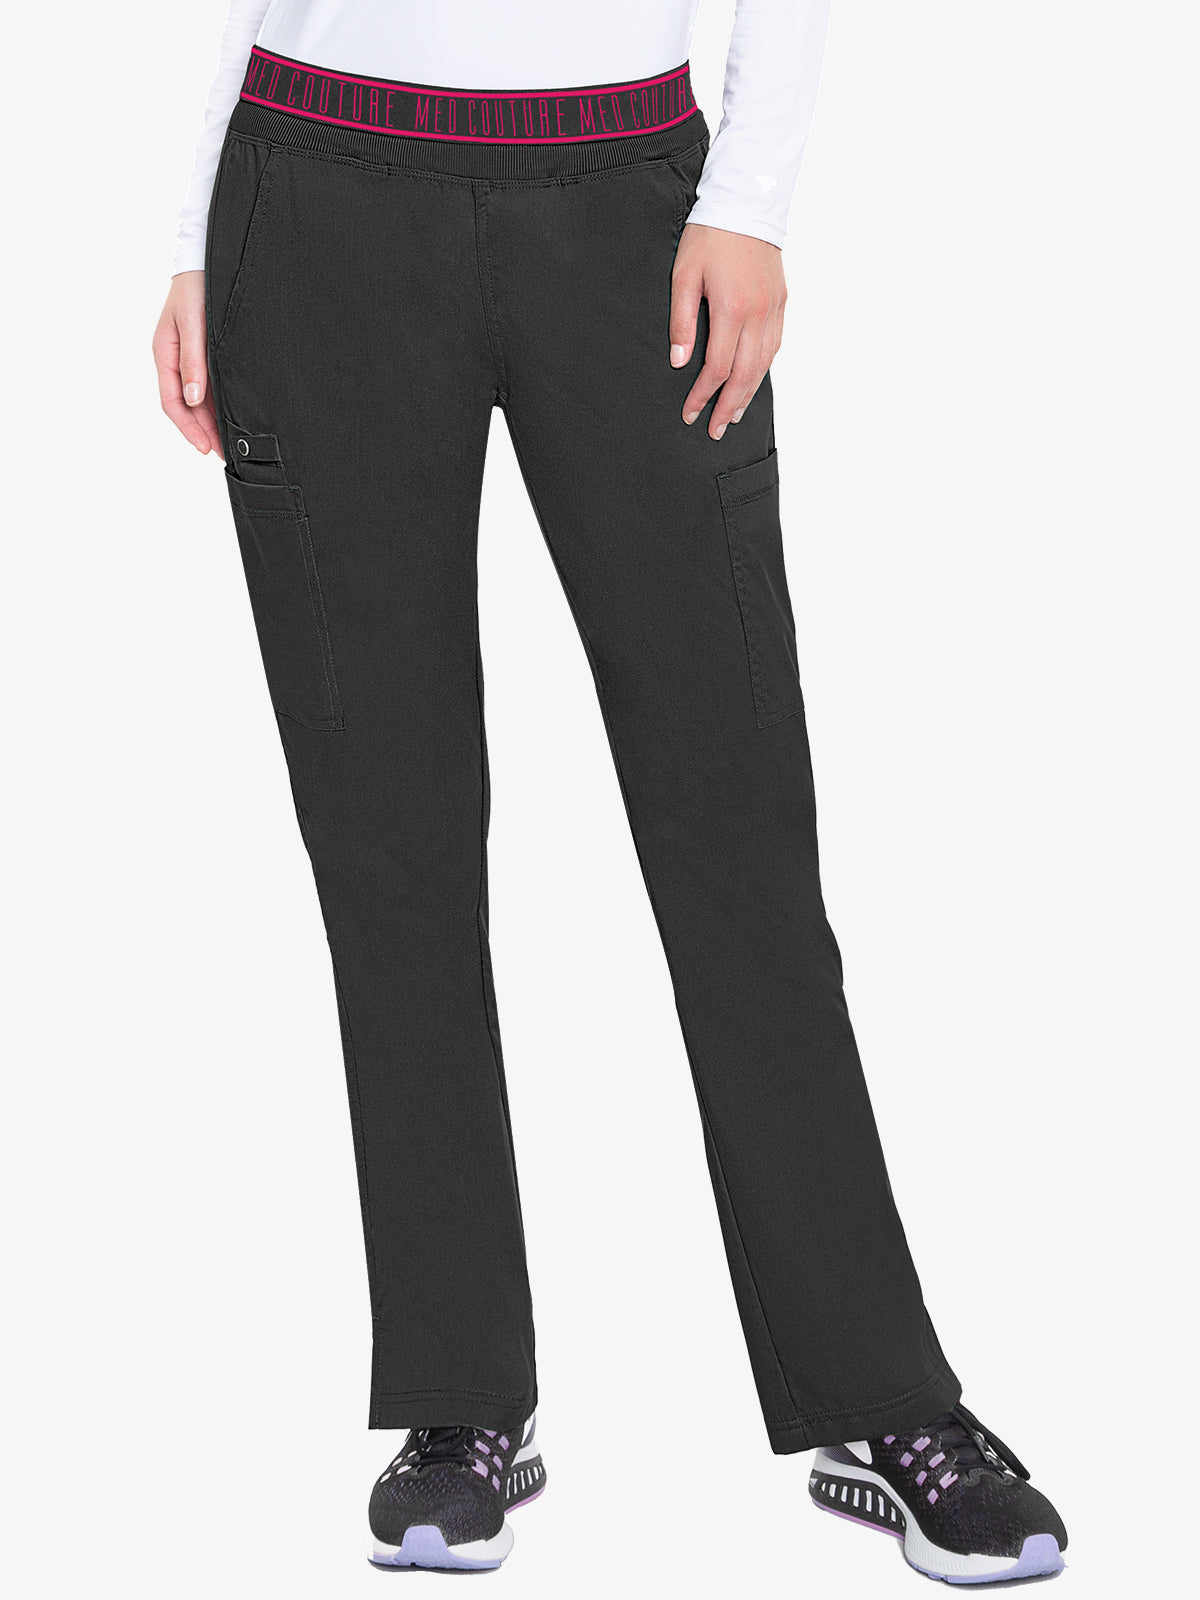 Med Couture Touch 7739 Women's Yoga 2 Cargo Pant Black